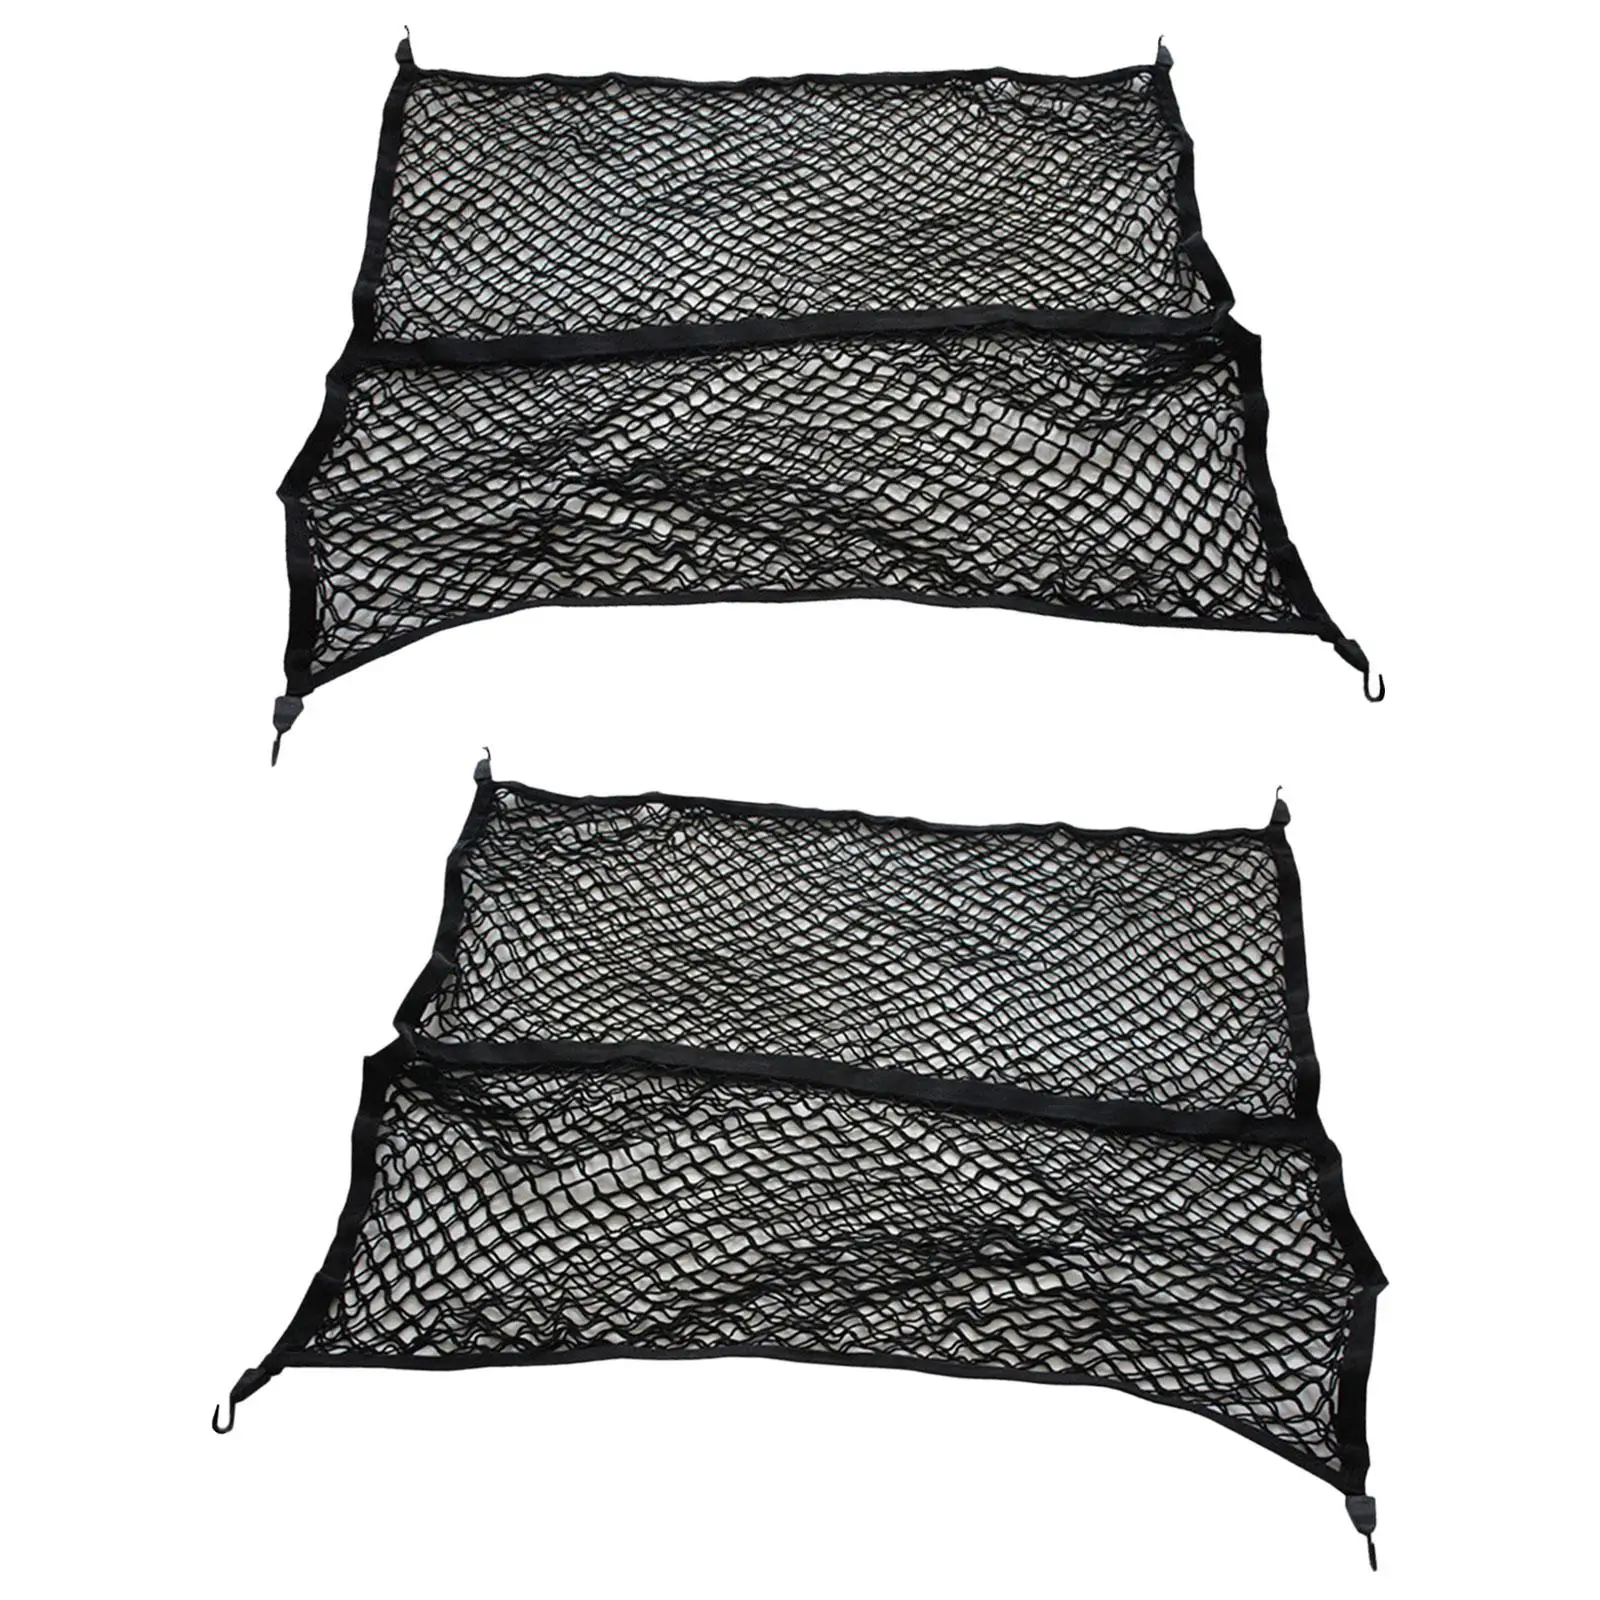 

Cargo Net Spare Parts, Anti Slip Wear Resistant Mesh, Organizer Accessory for Pickup Truck Bed Daily Light Loads of Trucks